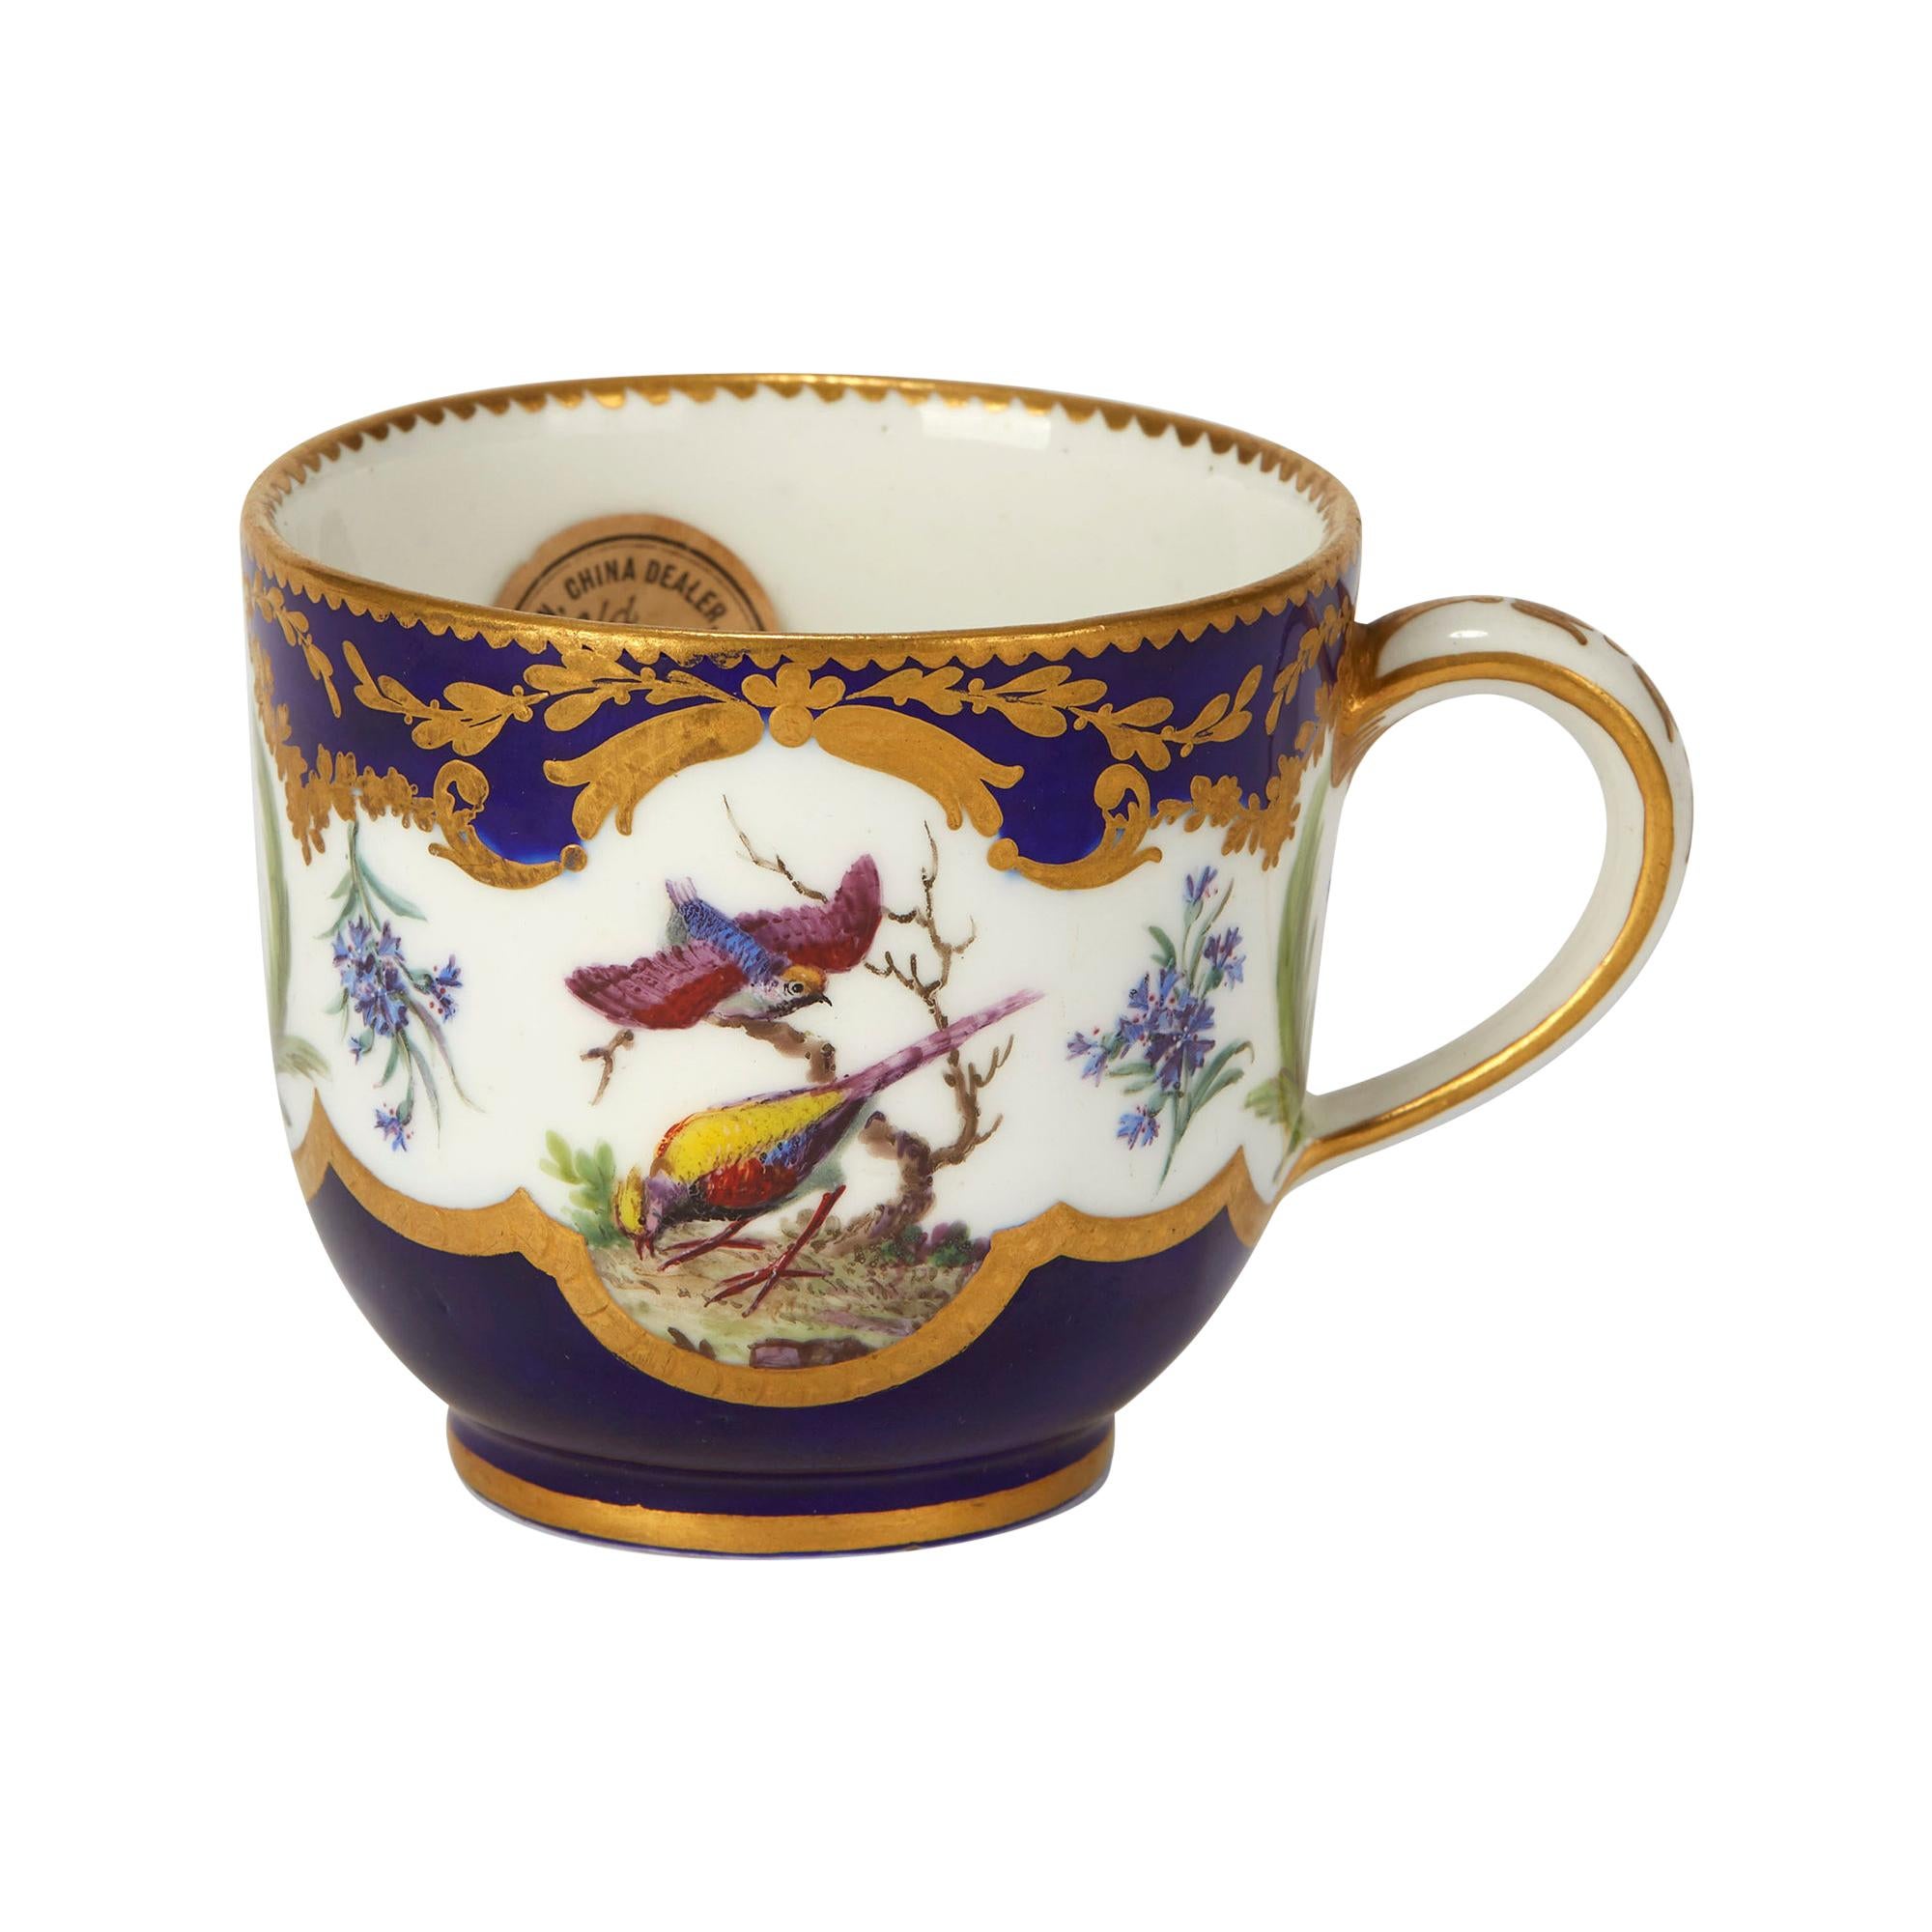 Sèvres French Porcelain Hand Painted and Gilded Teacup, circa 1752